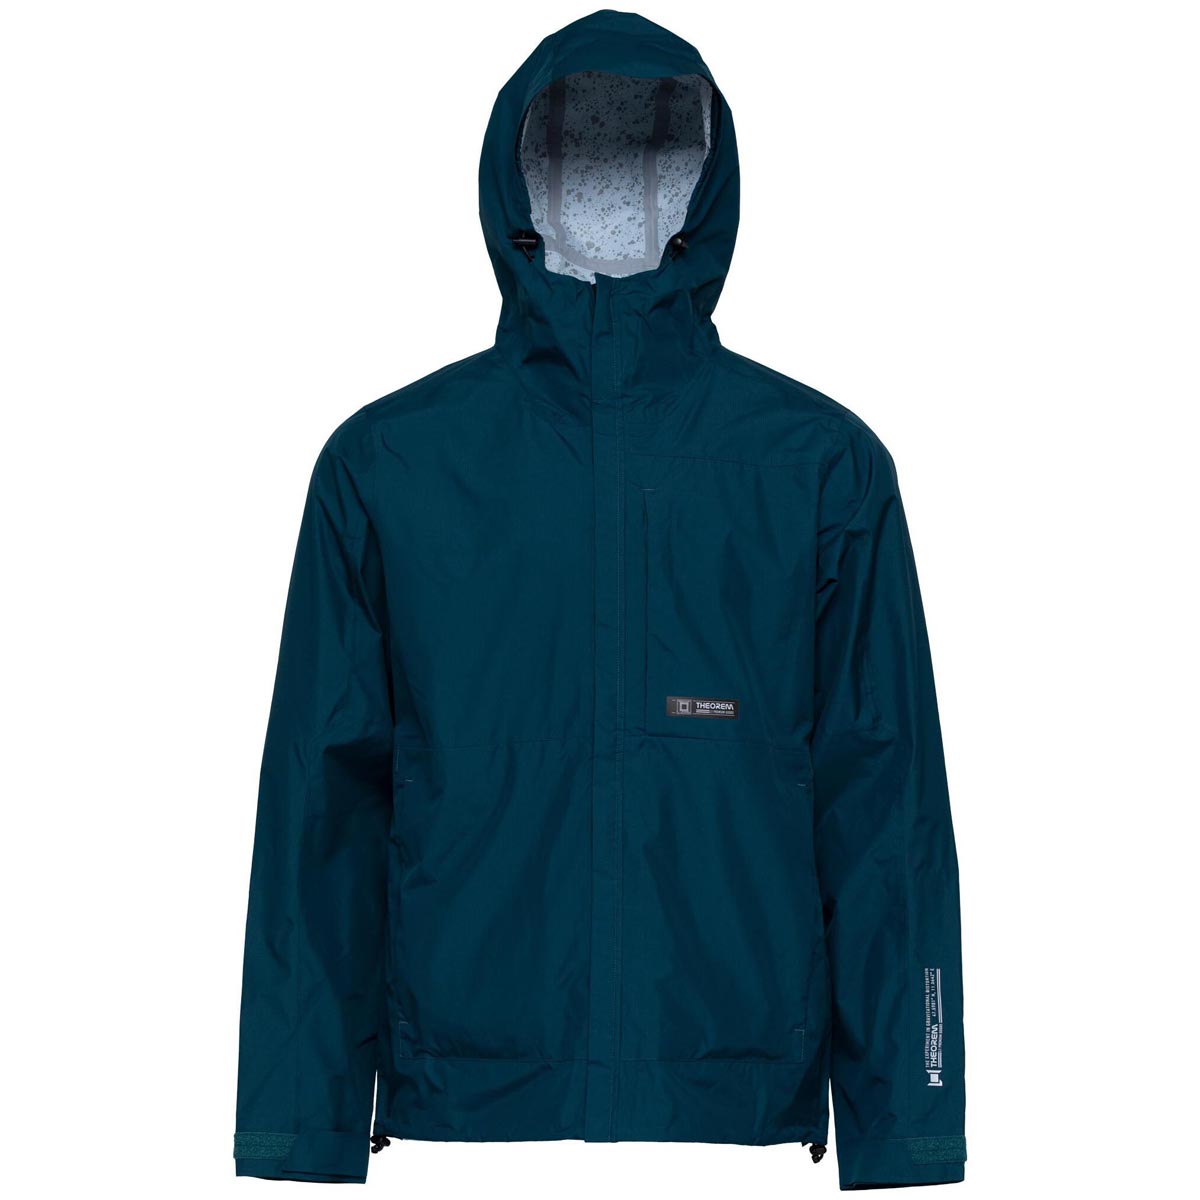 L1 Diffuse 2024 Snowboard Jacket - Abyss image 2